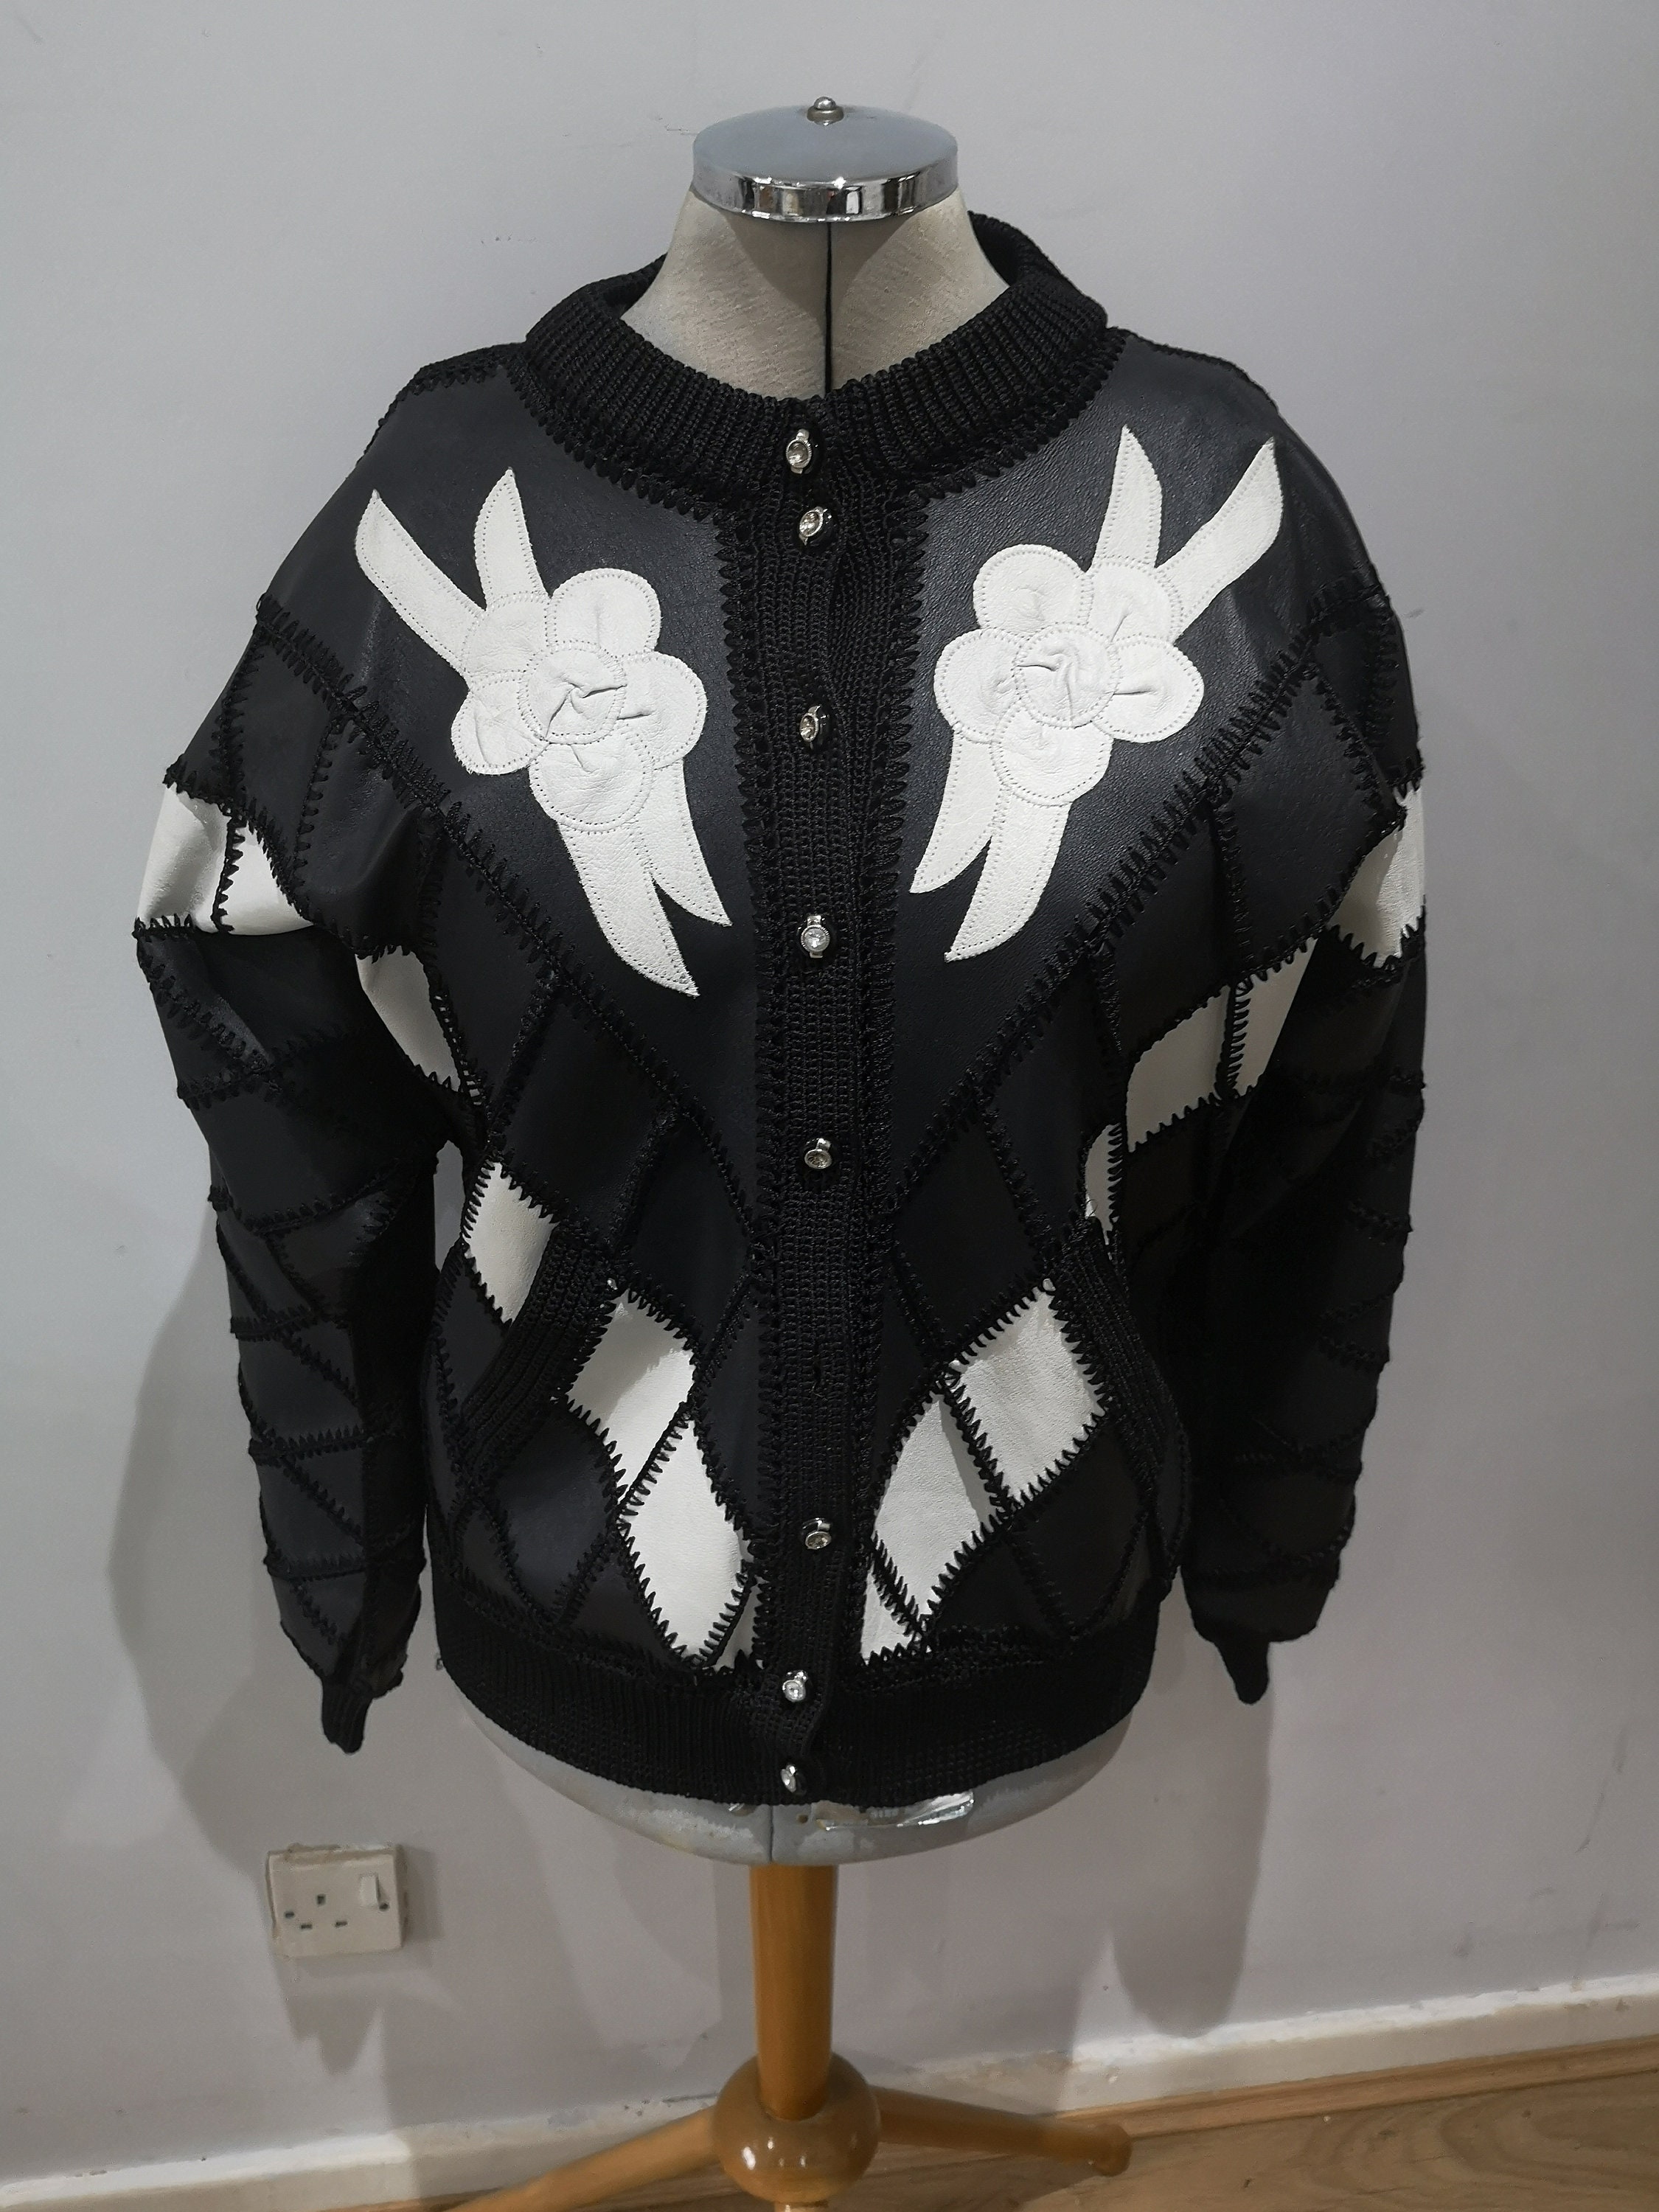 PenelopesAttire Vintage 1980's Leather and Crochet Patch Work Jacket with White Leather Flowers. 80's Black Leather Bomber Jacket with Flowers. UK 12